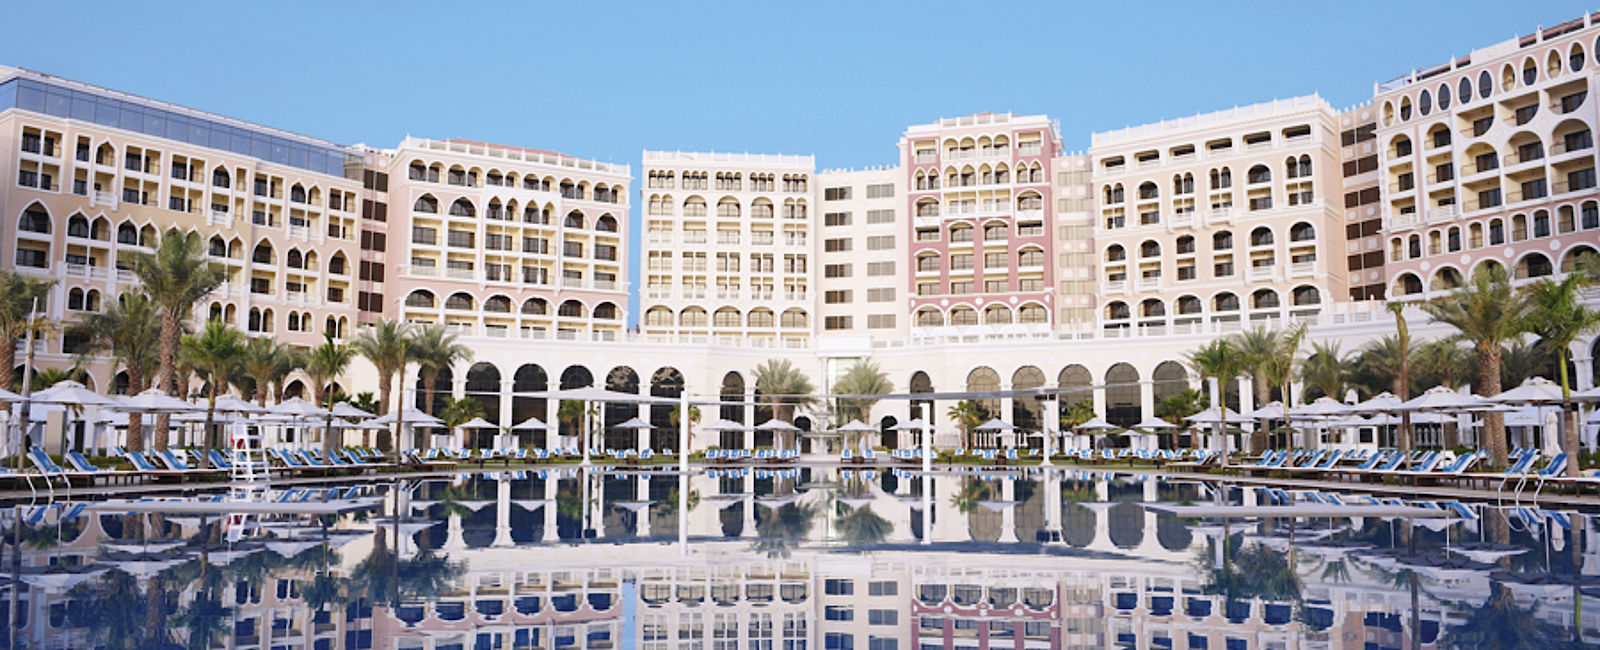 VERY SPECIAL HOTEL
 The Ritz-Carlton Abu Dhabi, Grand Canal 
 Ort der Begegnung 